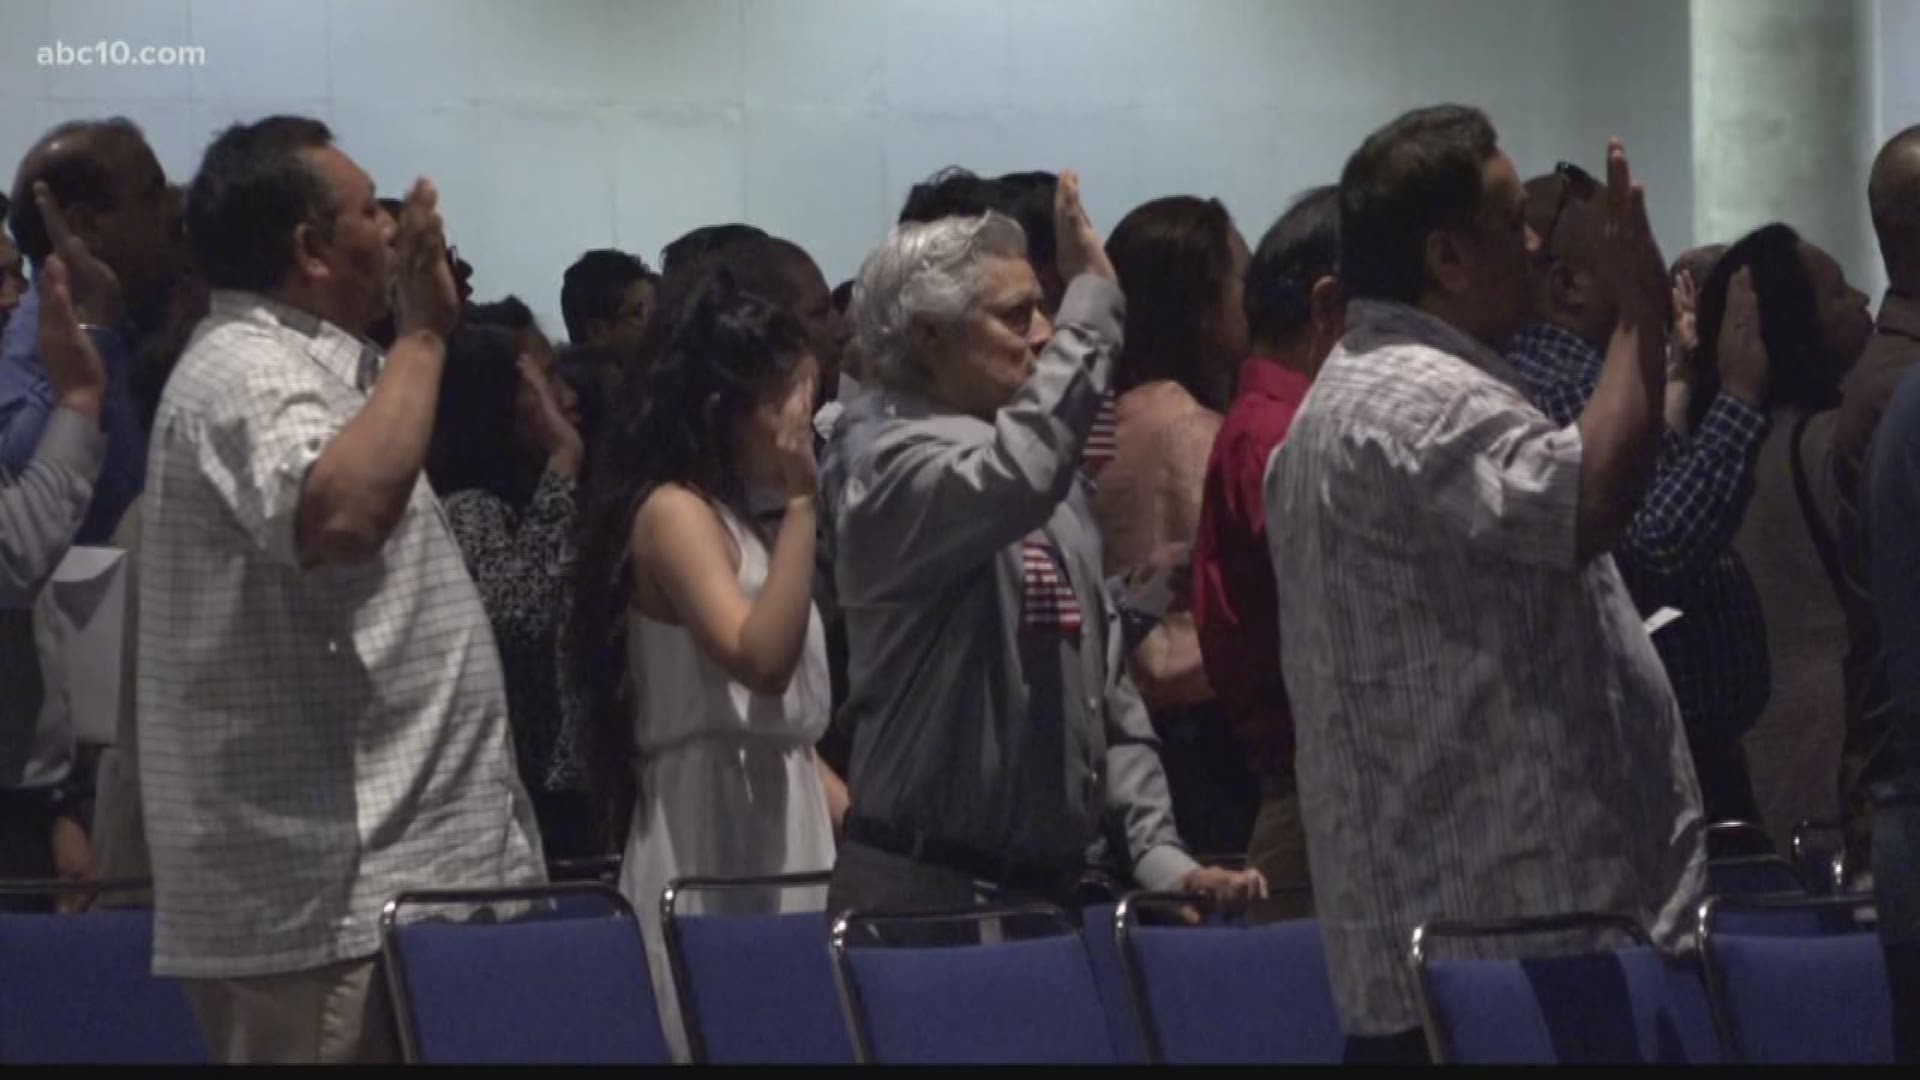 More than 1,000 immigrants from 86 nations became American citizens Wednesday at the Sacramento Convention Center. (June 20, 2018)